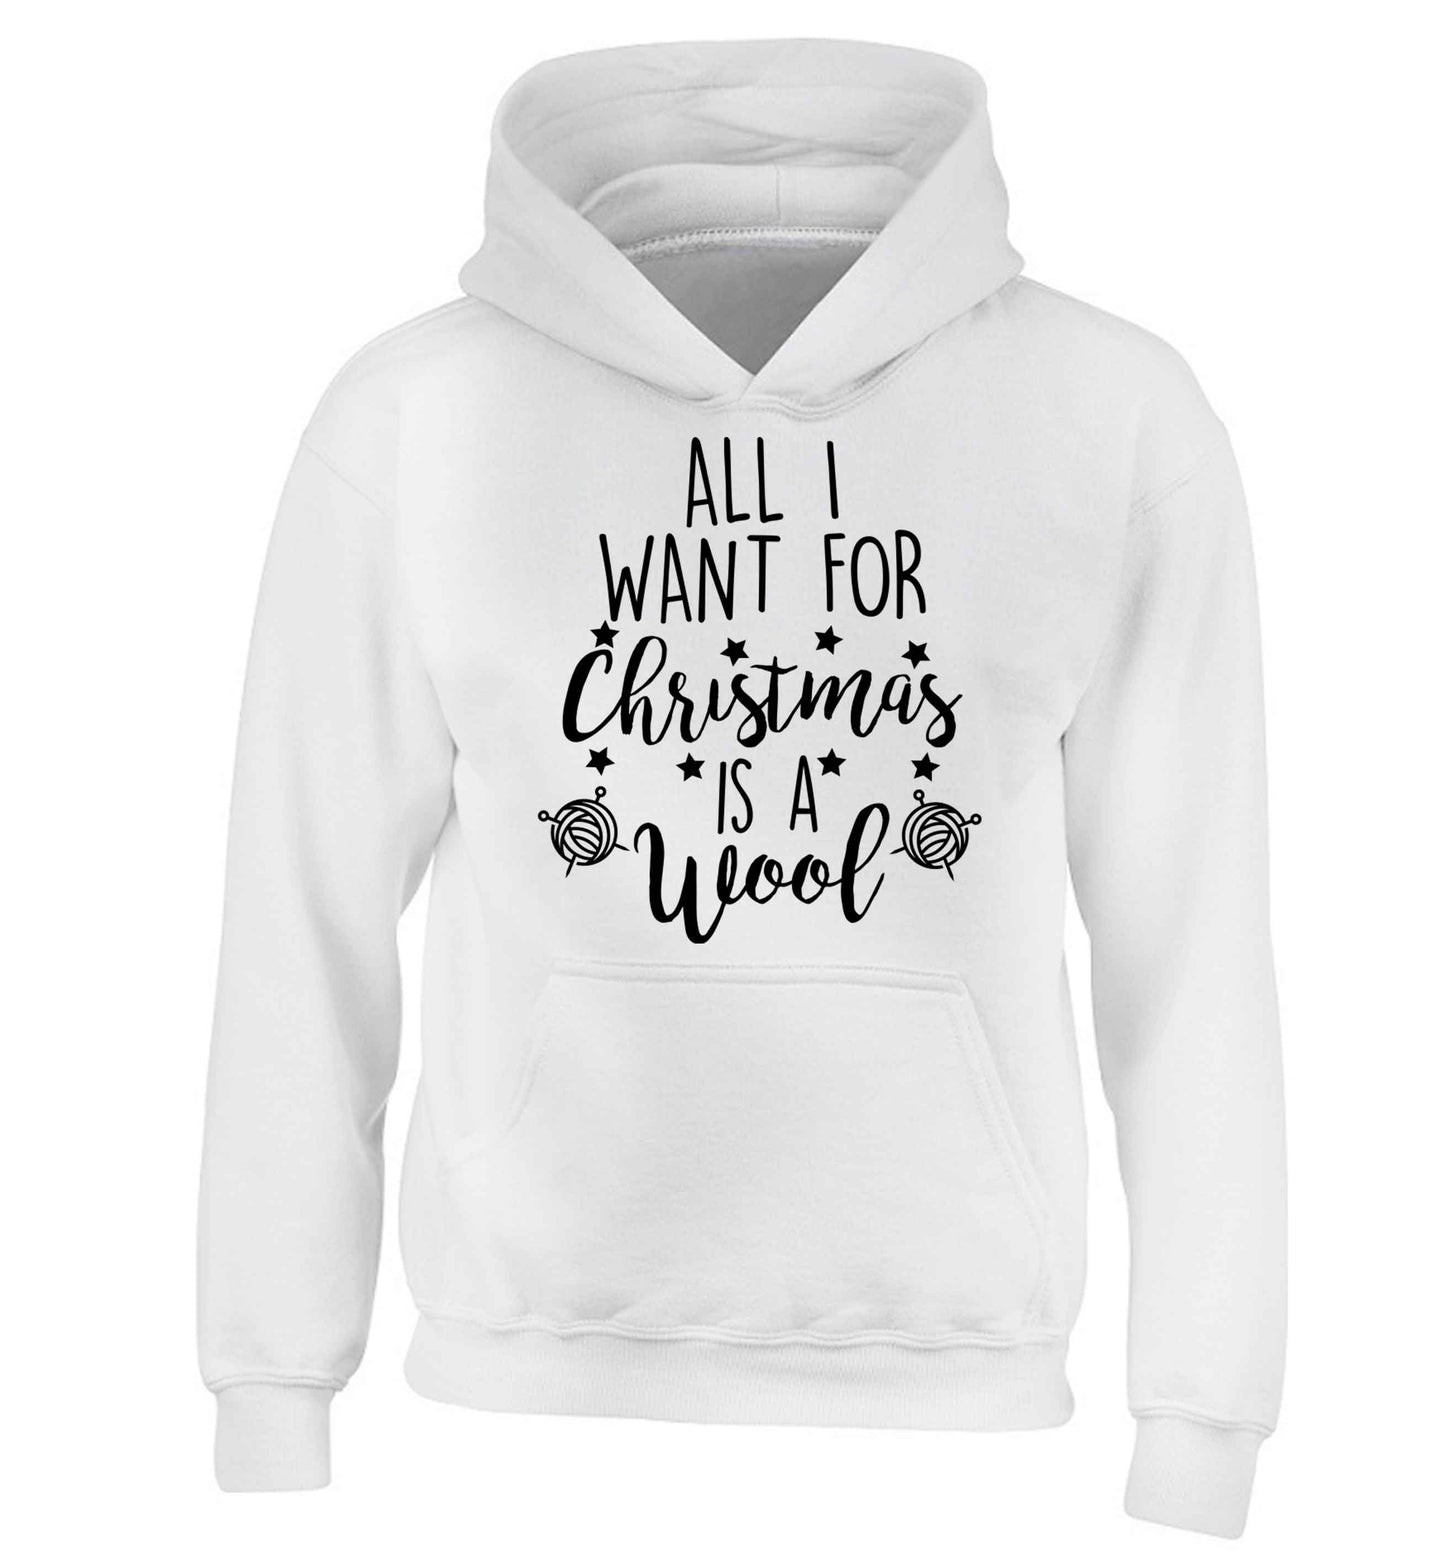 All I want for Christmas is wool! children's white hoodie 12-13 Years